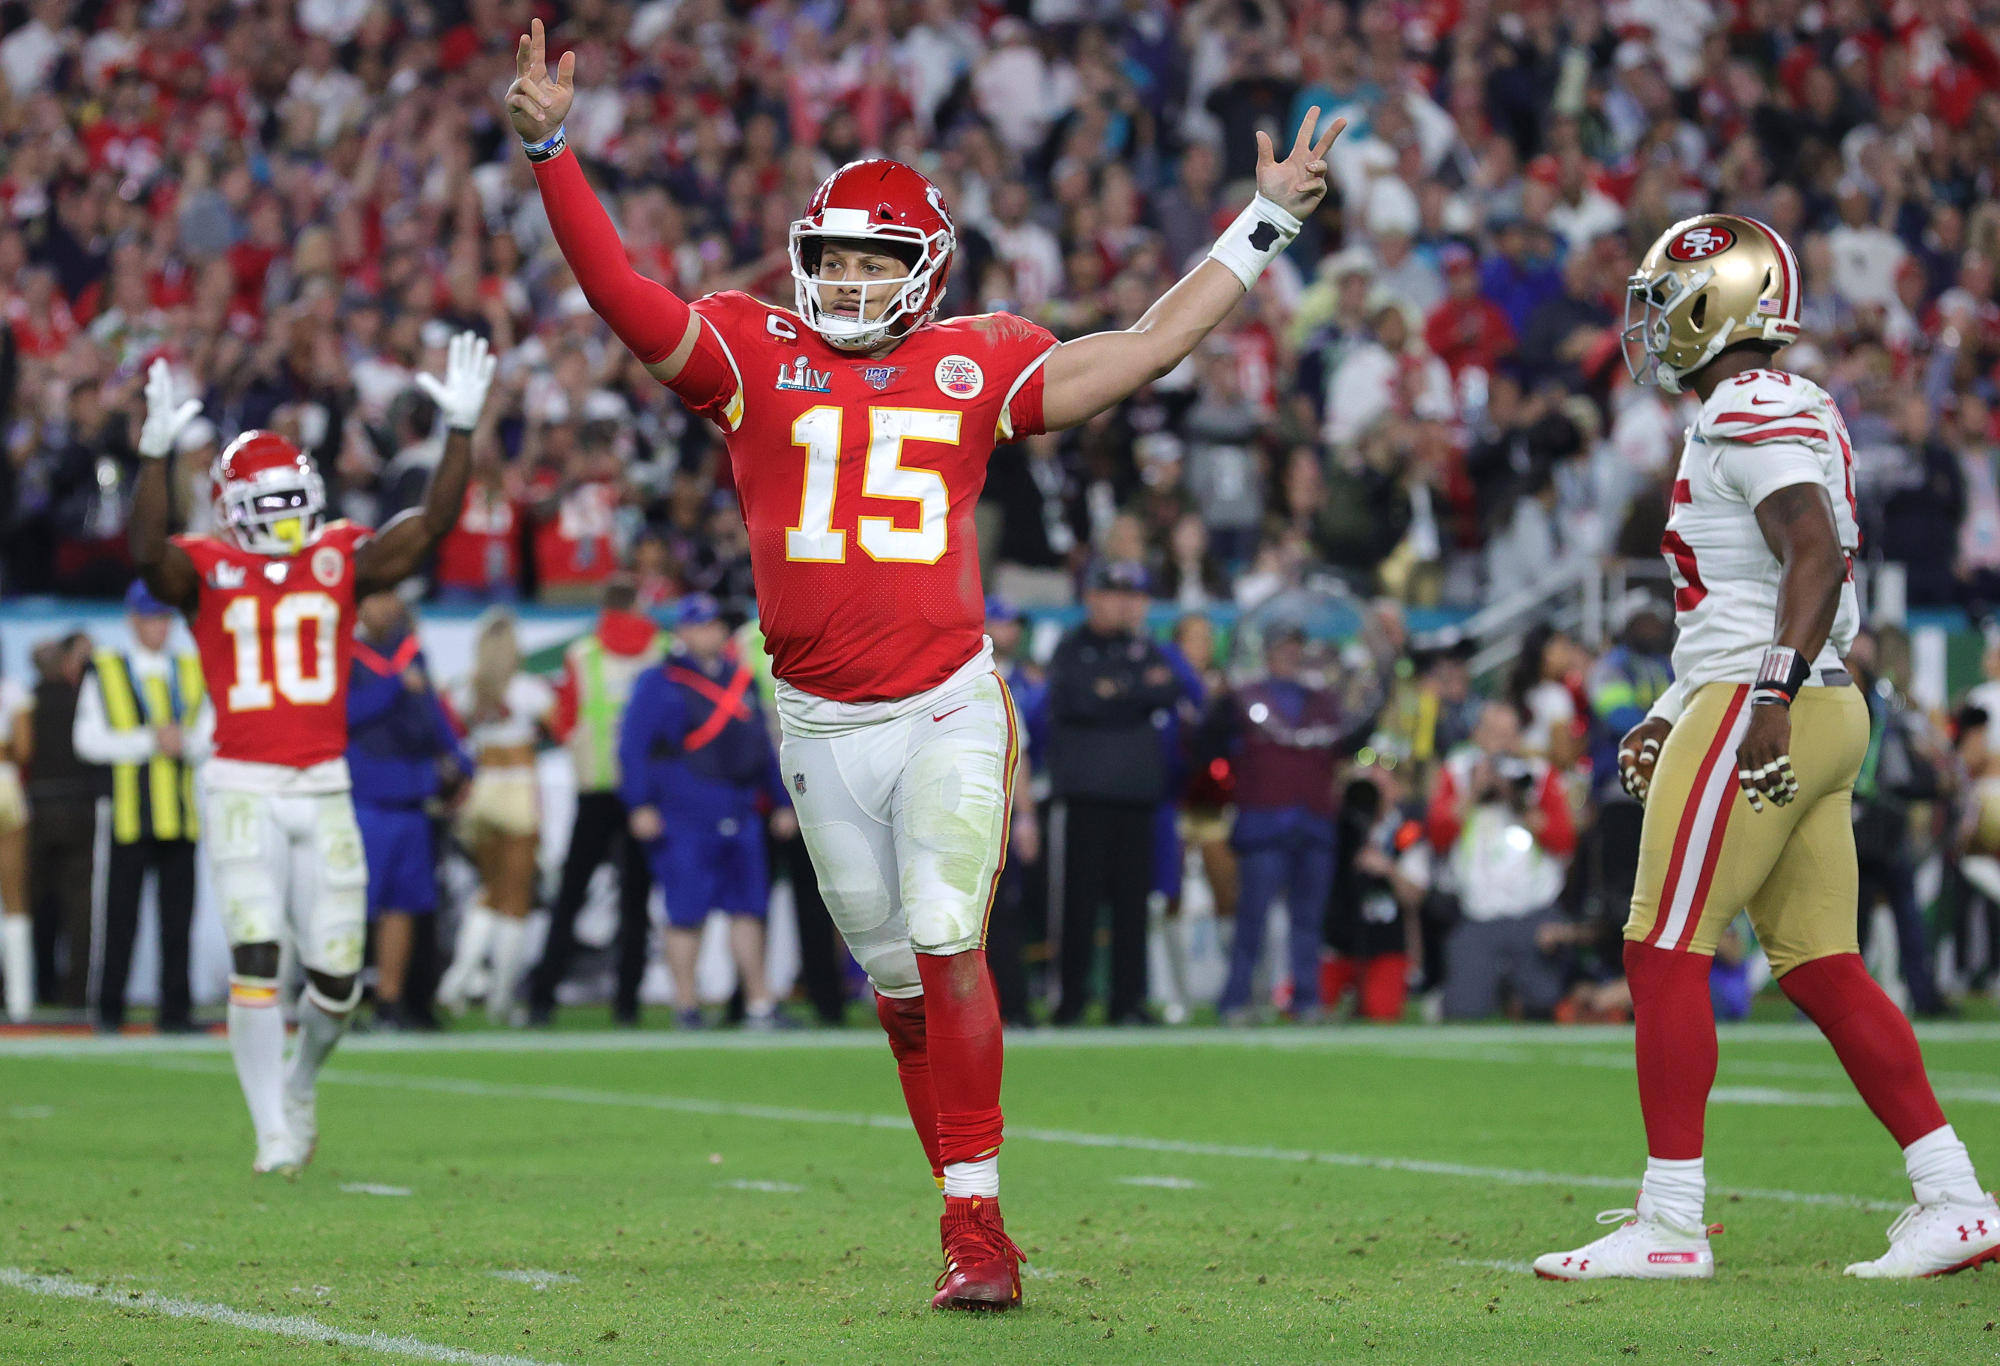 Patrick Mahomes #15 of the Kansas City Chiefs celebrates after throwing a touchdown pass